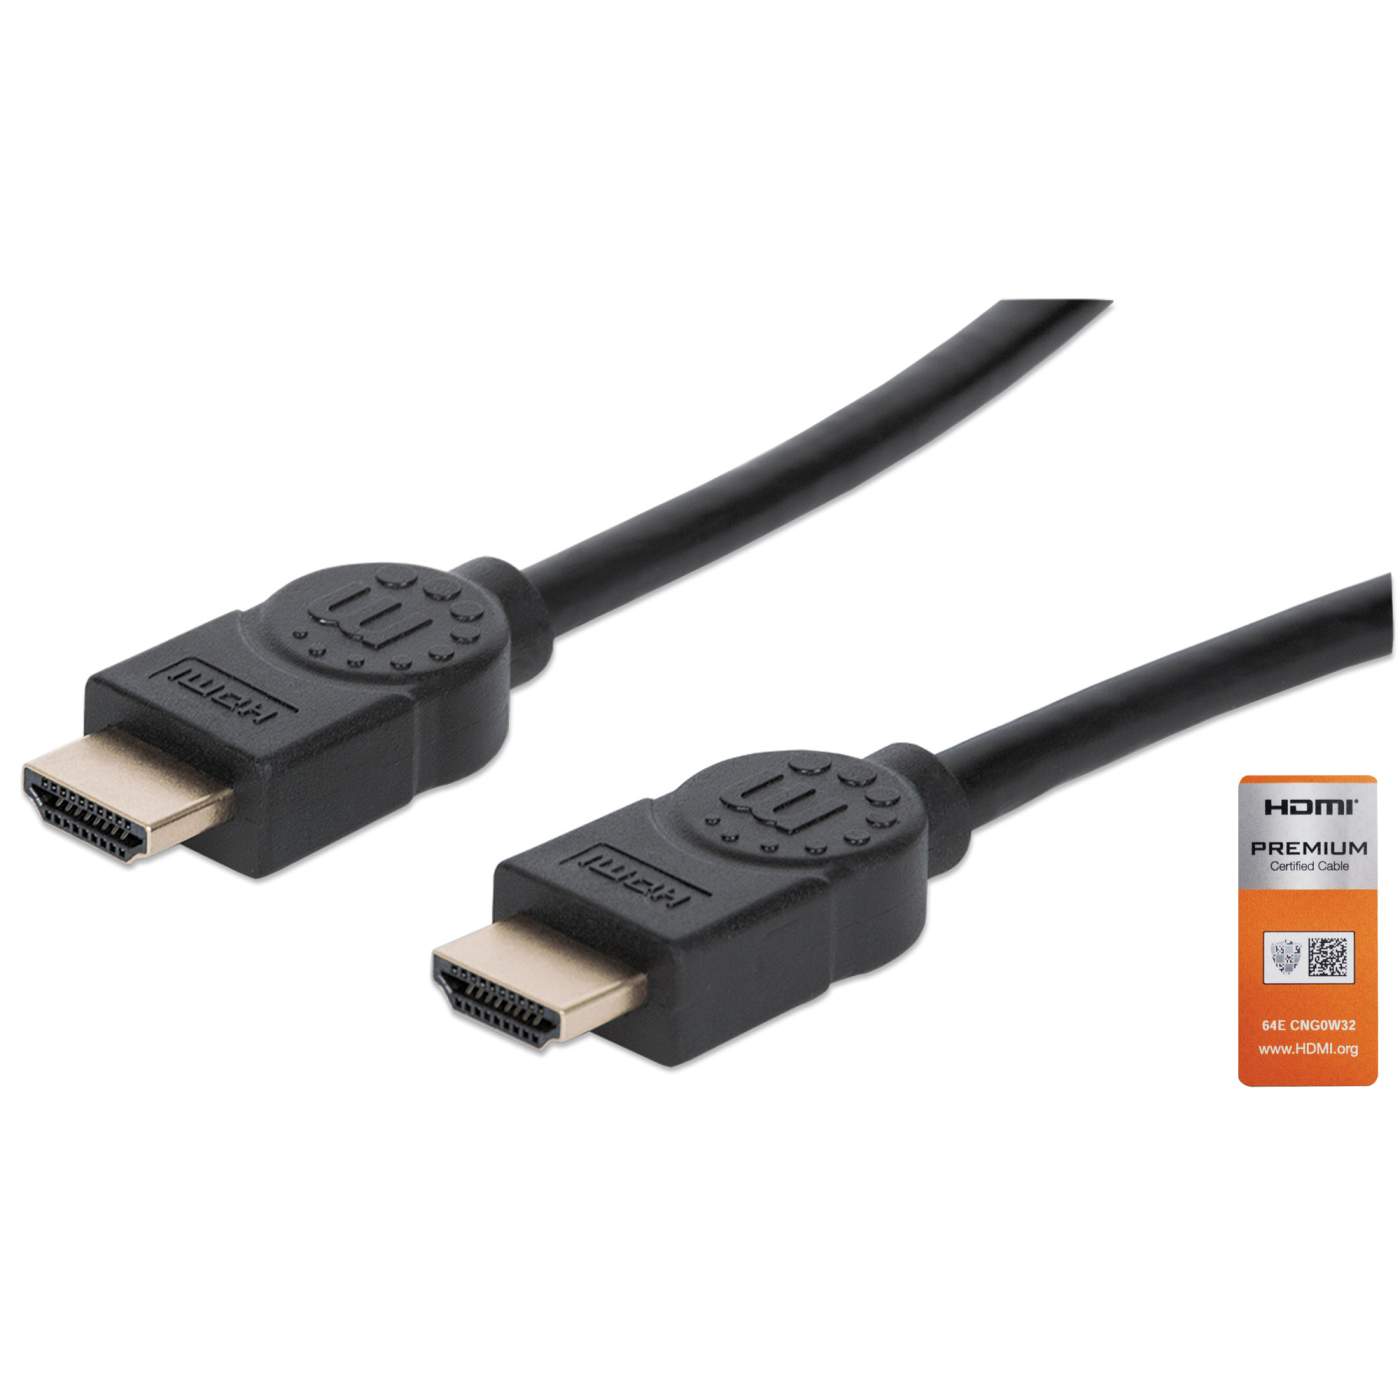 4K@60Hz Certified Premium High Speed HDMI Cable with Ethernet Image 1